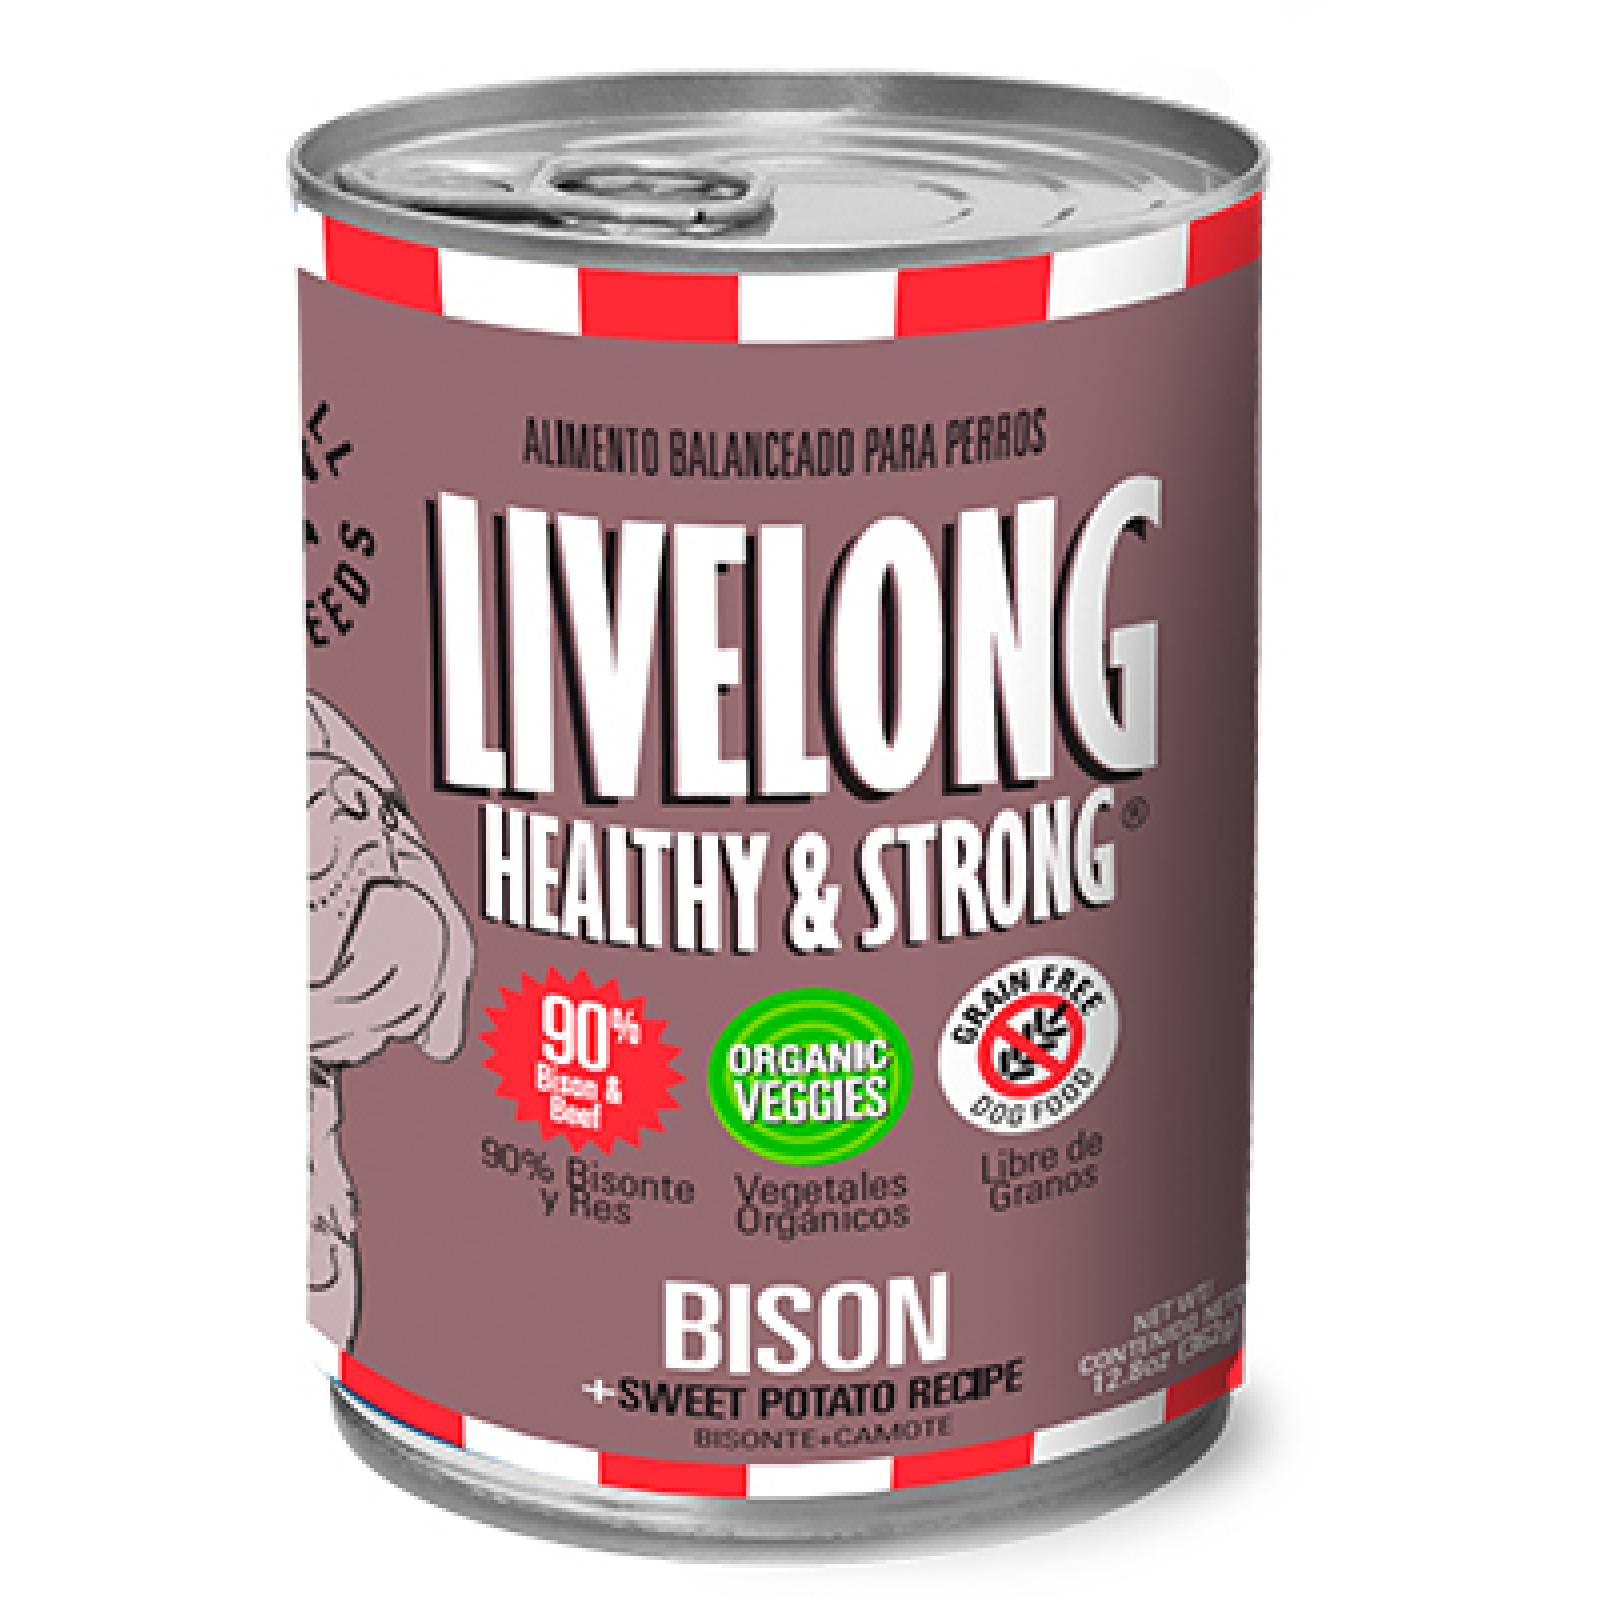 LiveLong Healthy & Strong Alimento para Perro Humedo Bison + Papa Dulce 368 gr